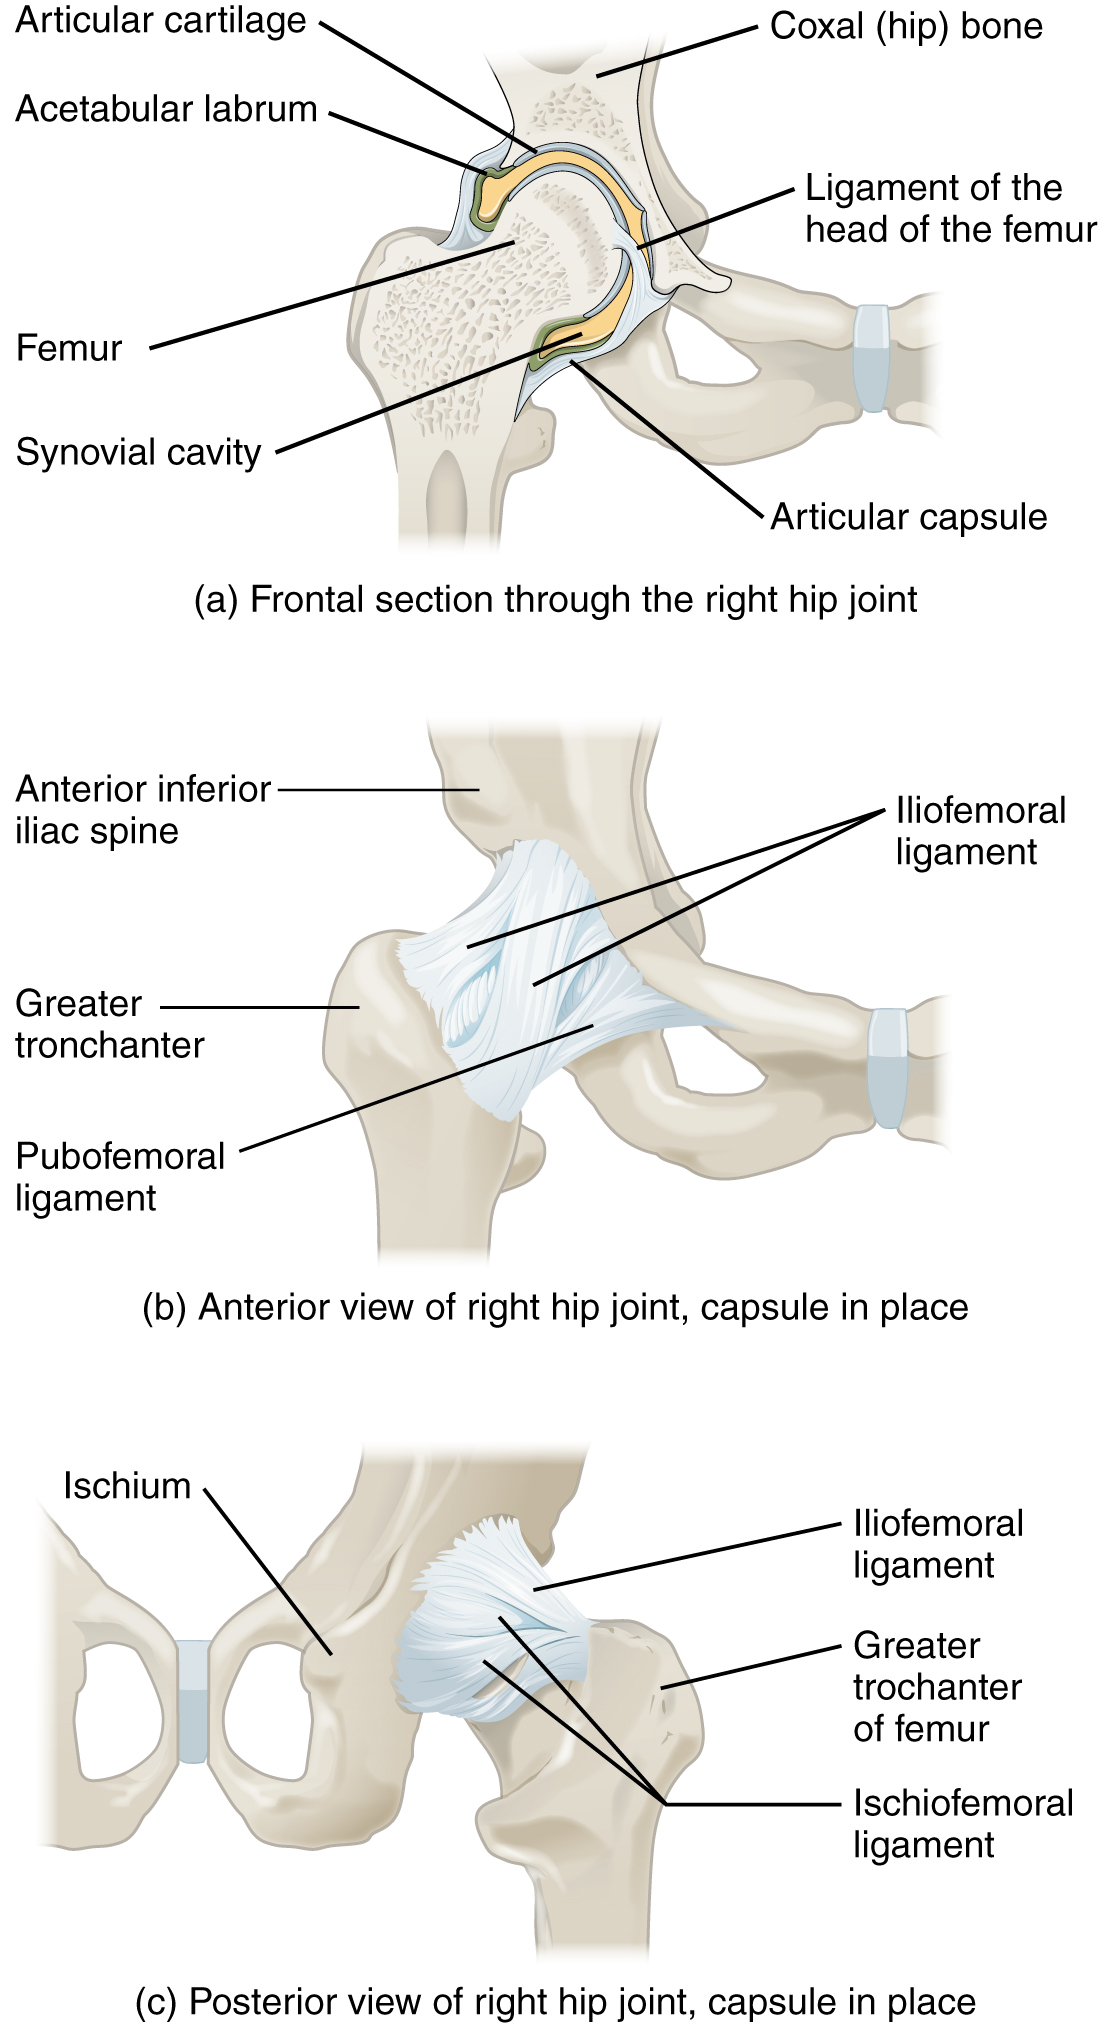 Frontal view of right hip joint; ligaments of the hip joint